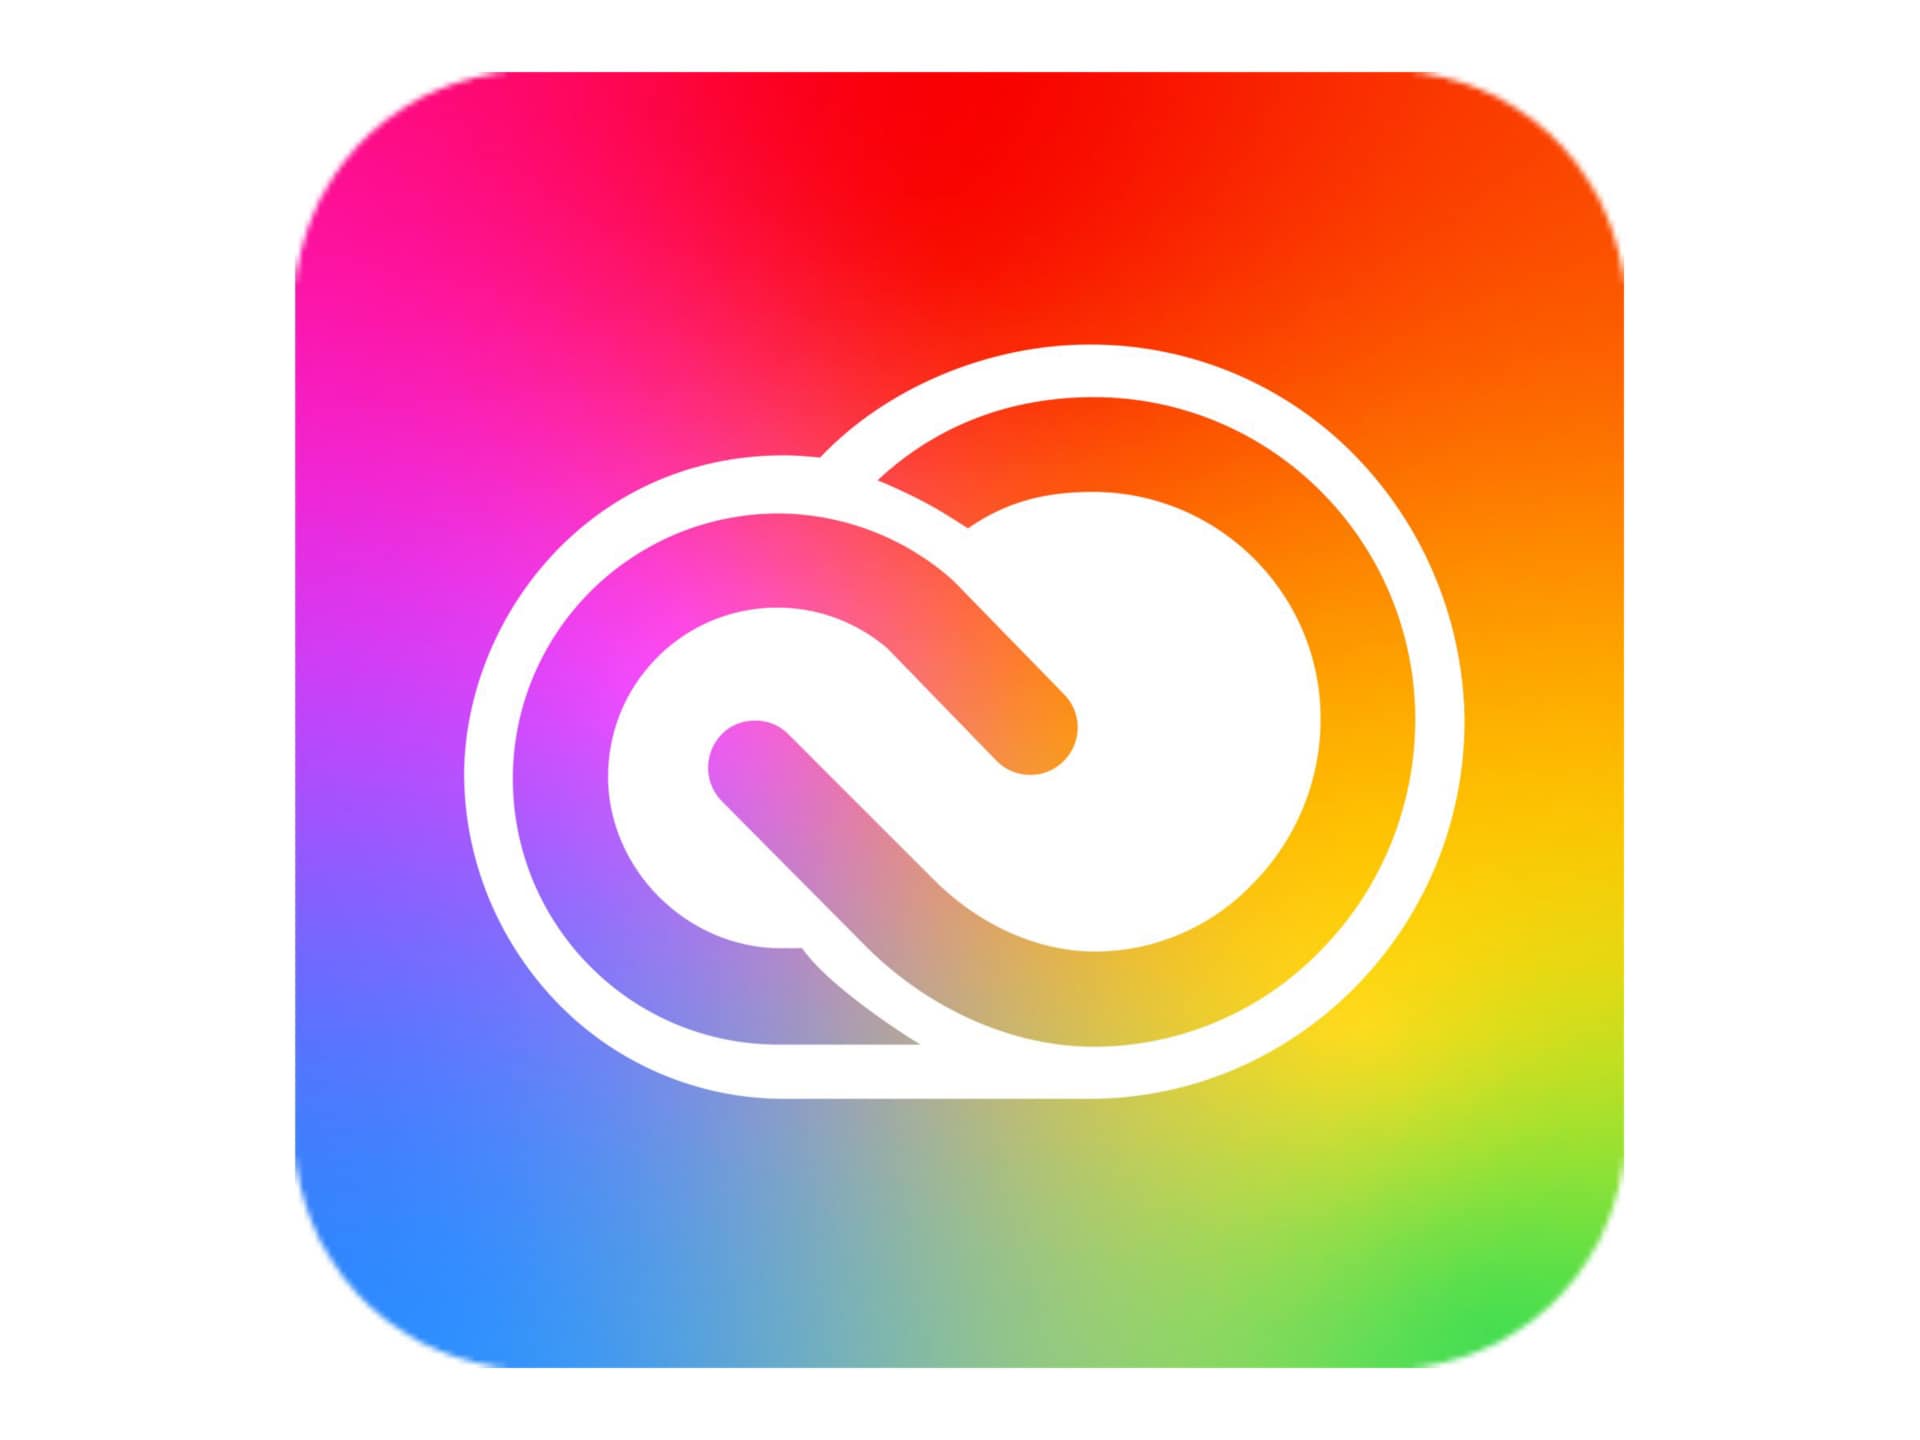 Adobe Creative Cloud for Enterprise - All Apps - Subscription New (16 months) - 1 device